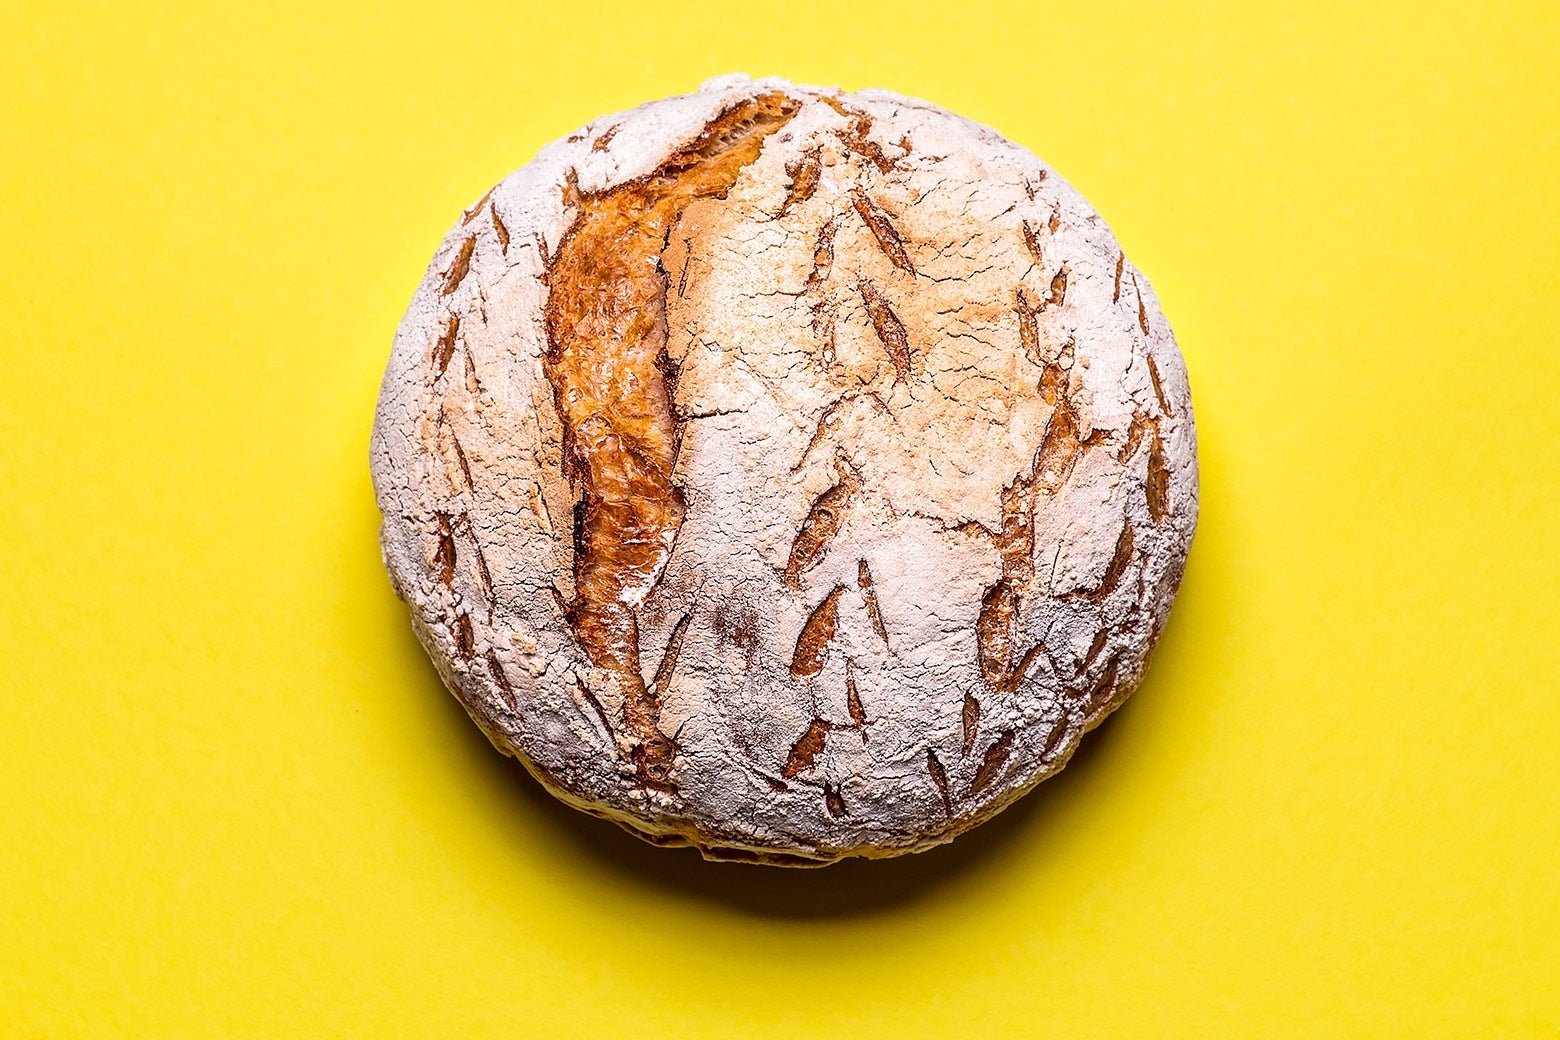 A loaf of leavened bread against a yellow background